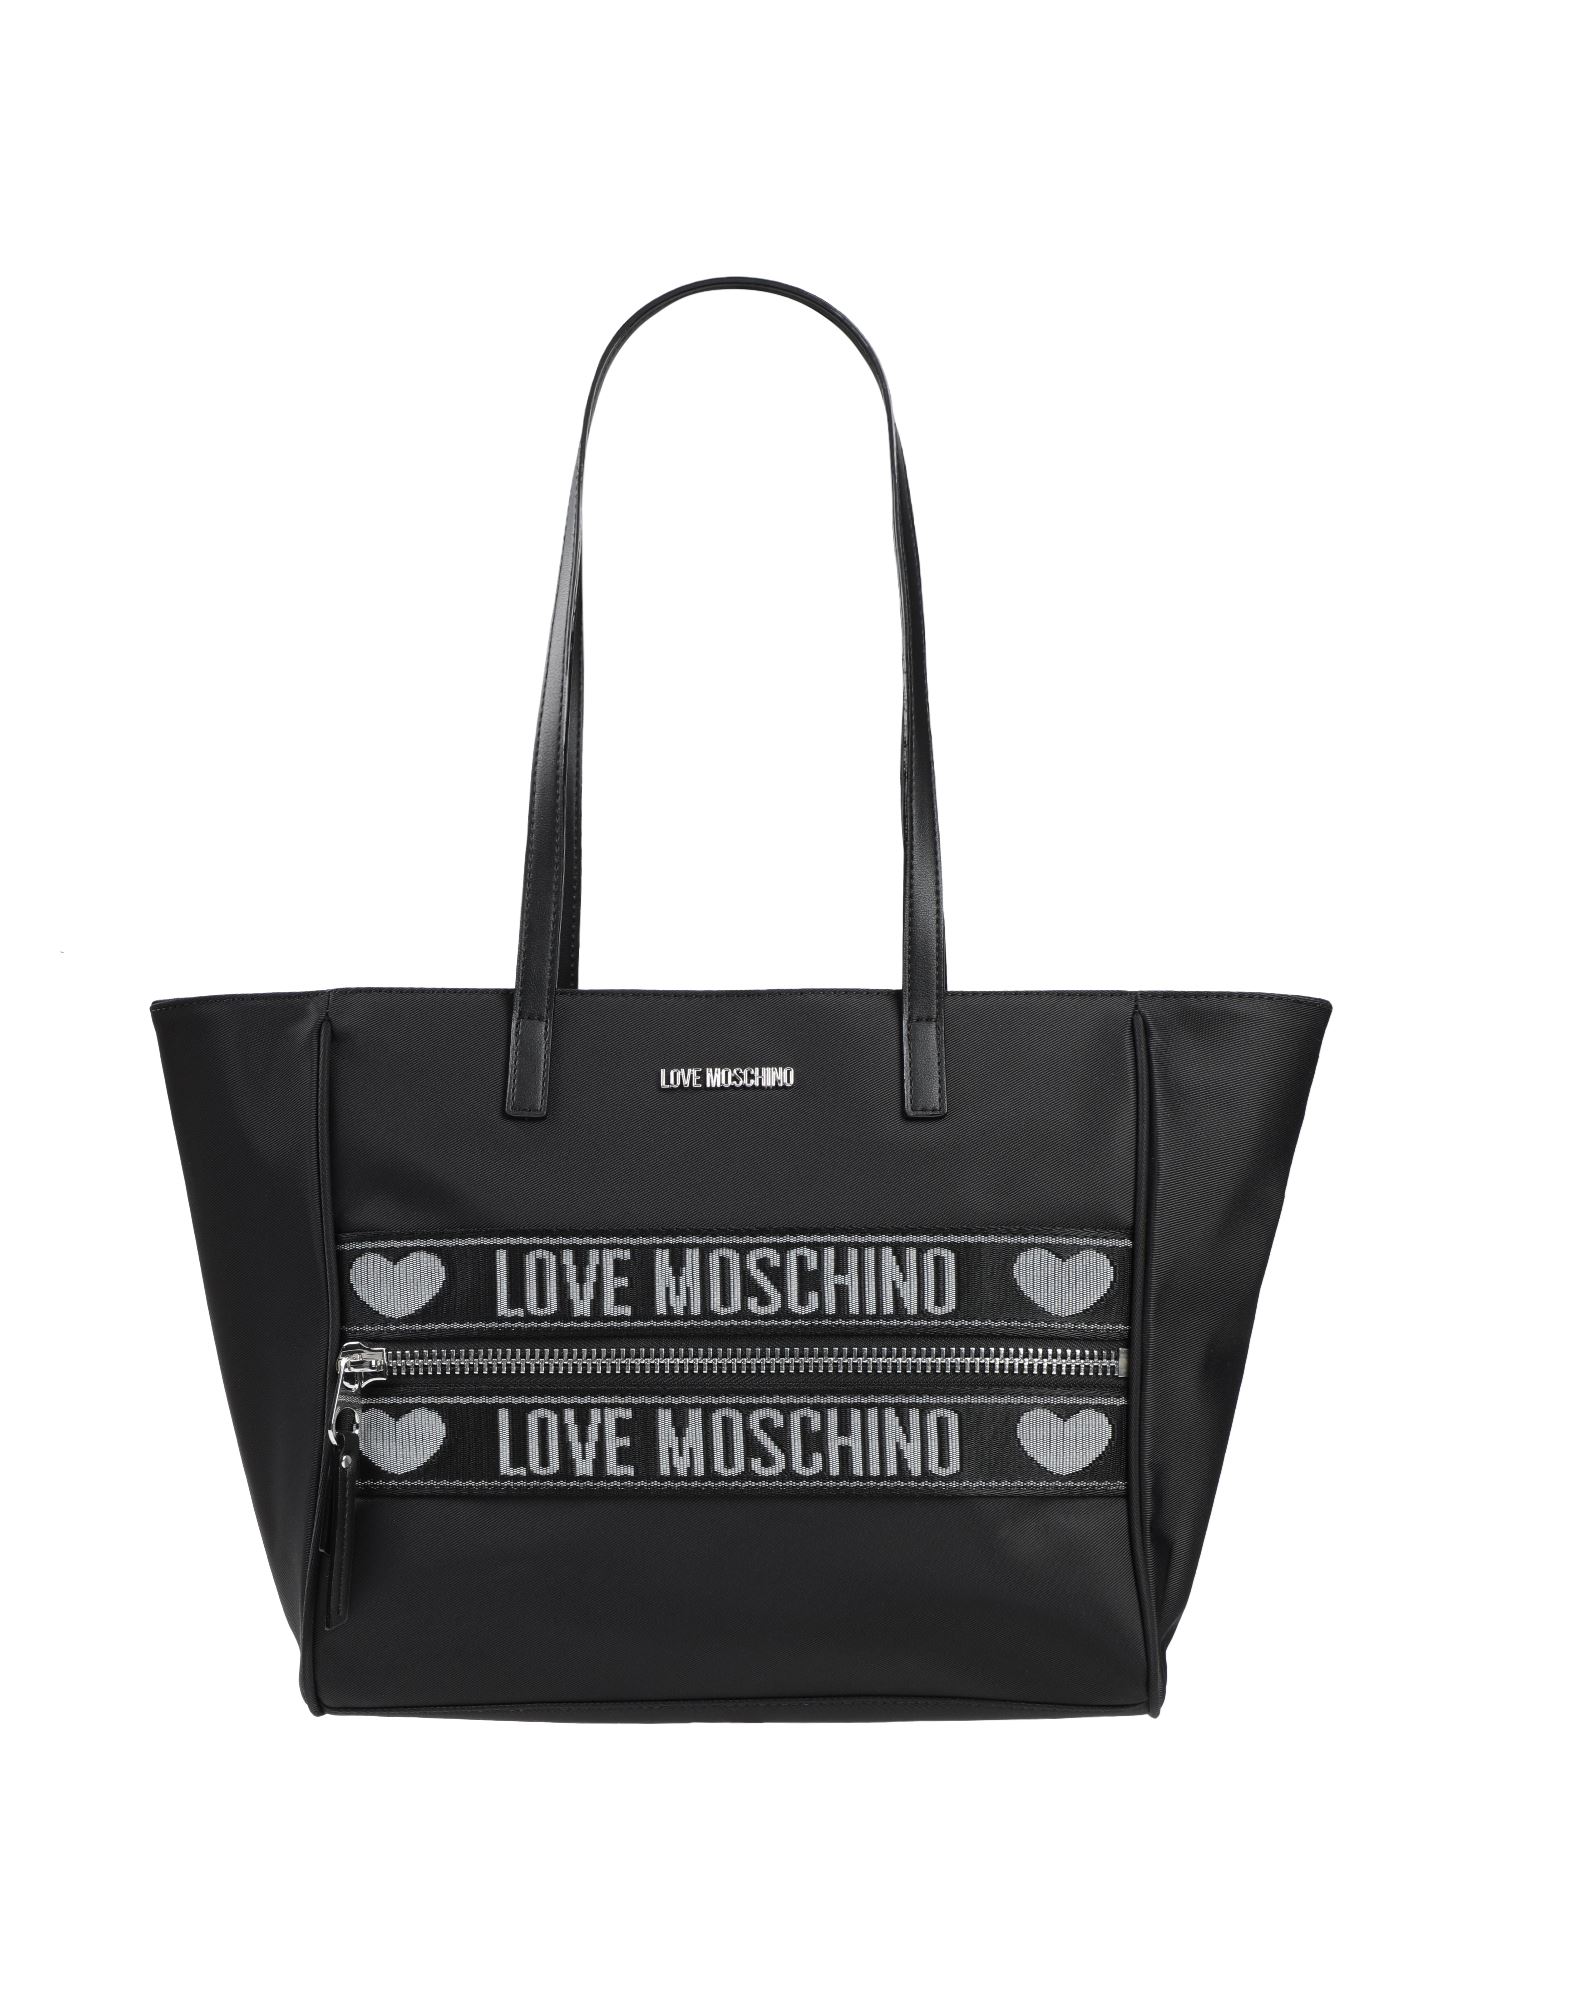 LOVE MOSCHINO Shoulder bags - Item 45553191